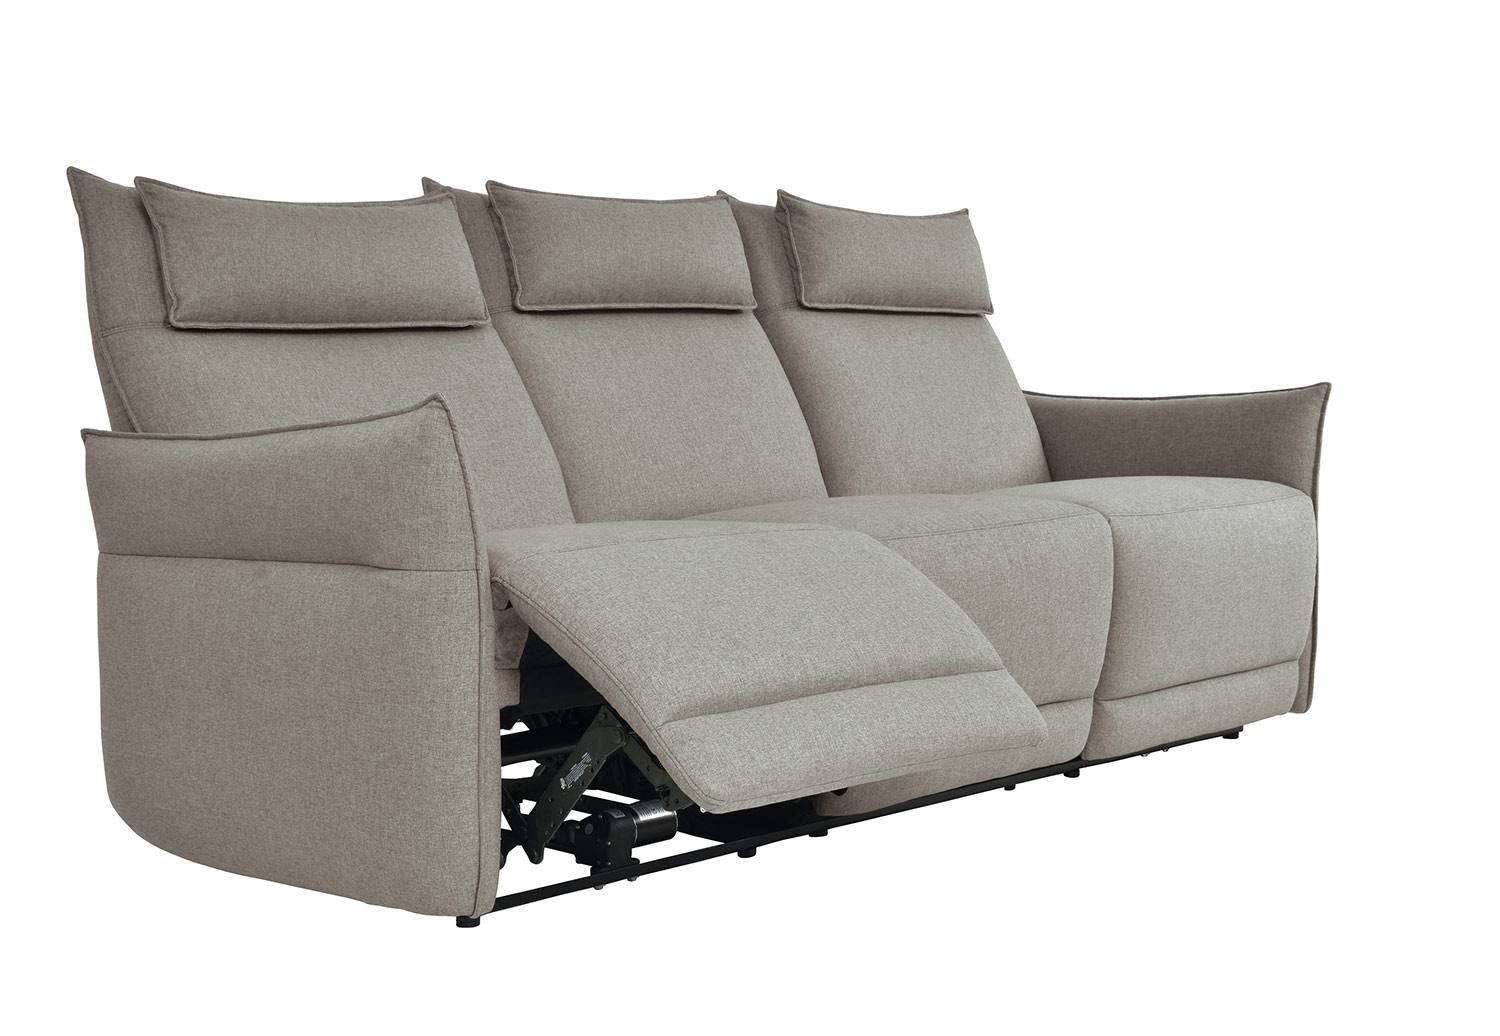 Homelegance Linette Power Double Reclining Sofa with Power Headrests - Taupe